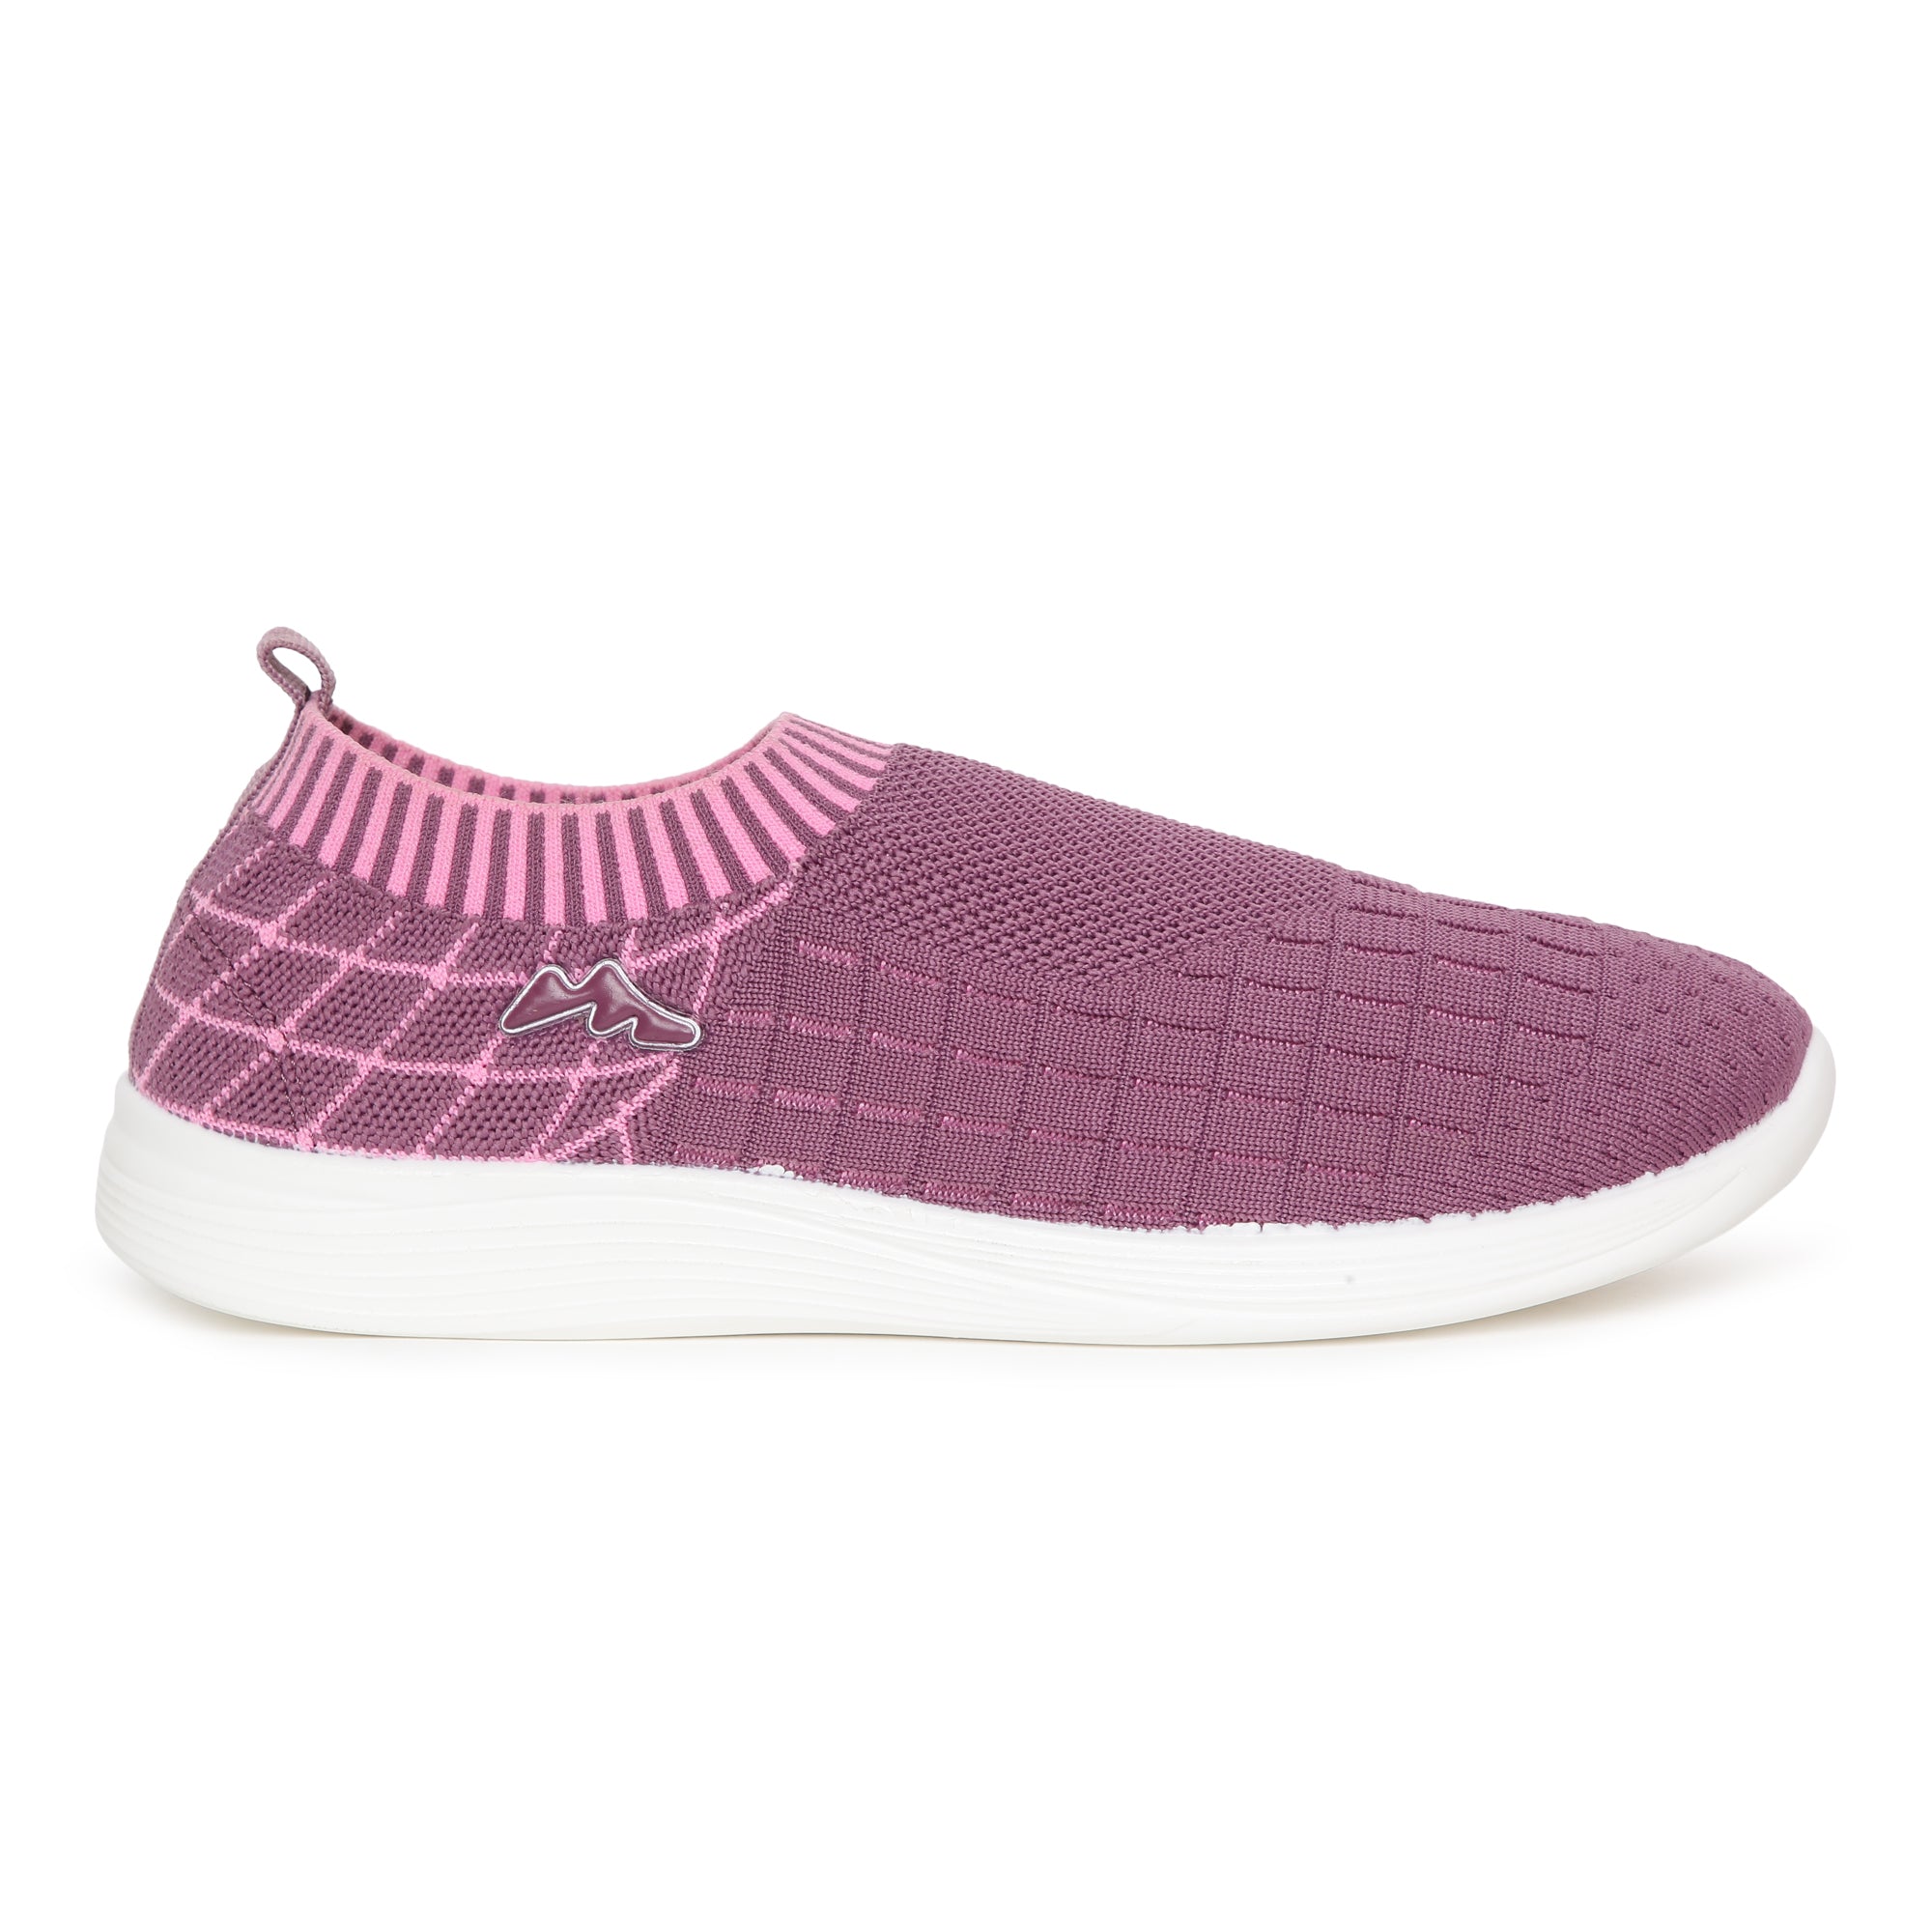 Stimulus PUSTL5021AP Purple Stylish Daily Comfortable Casual Shoes For Women